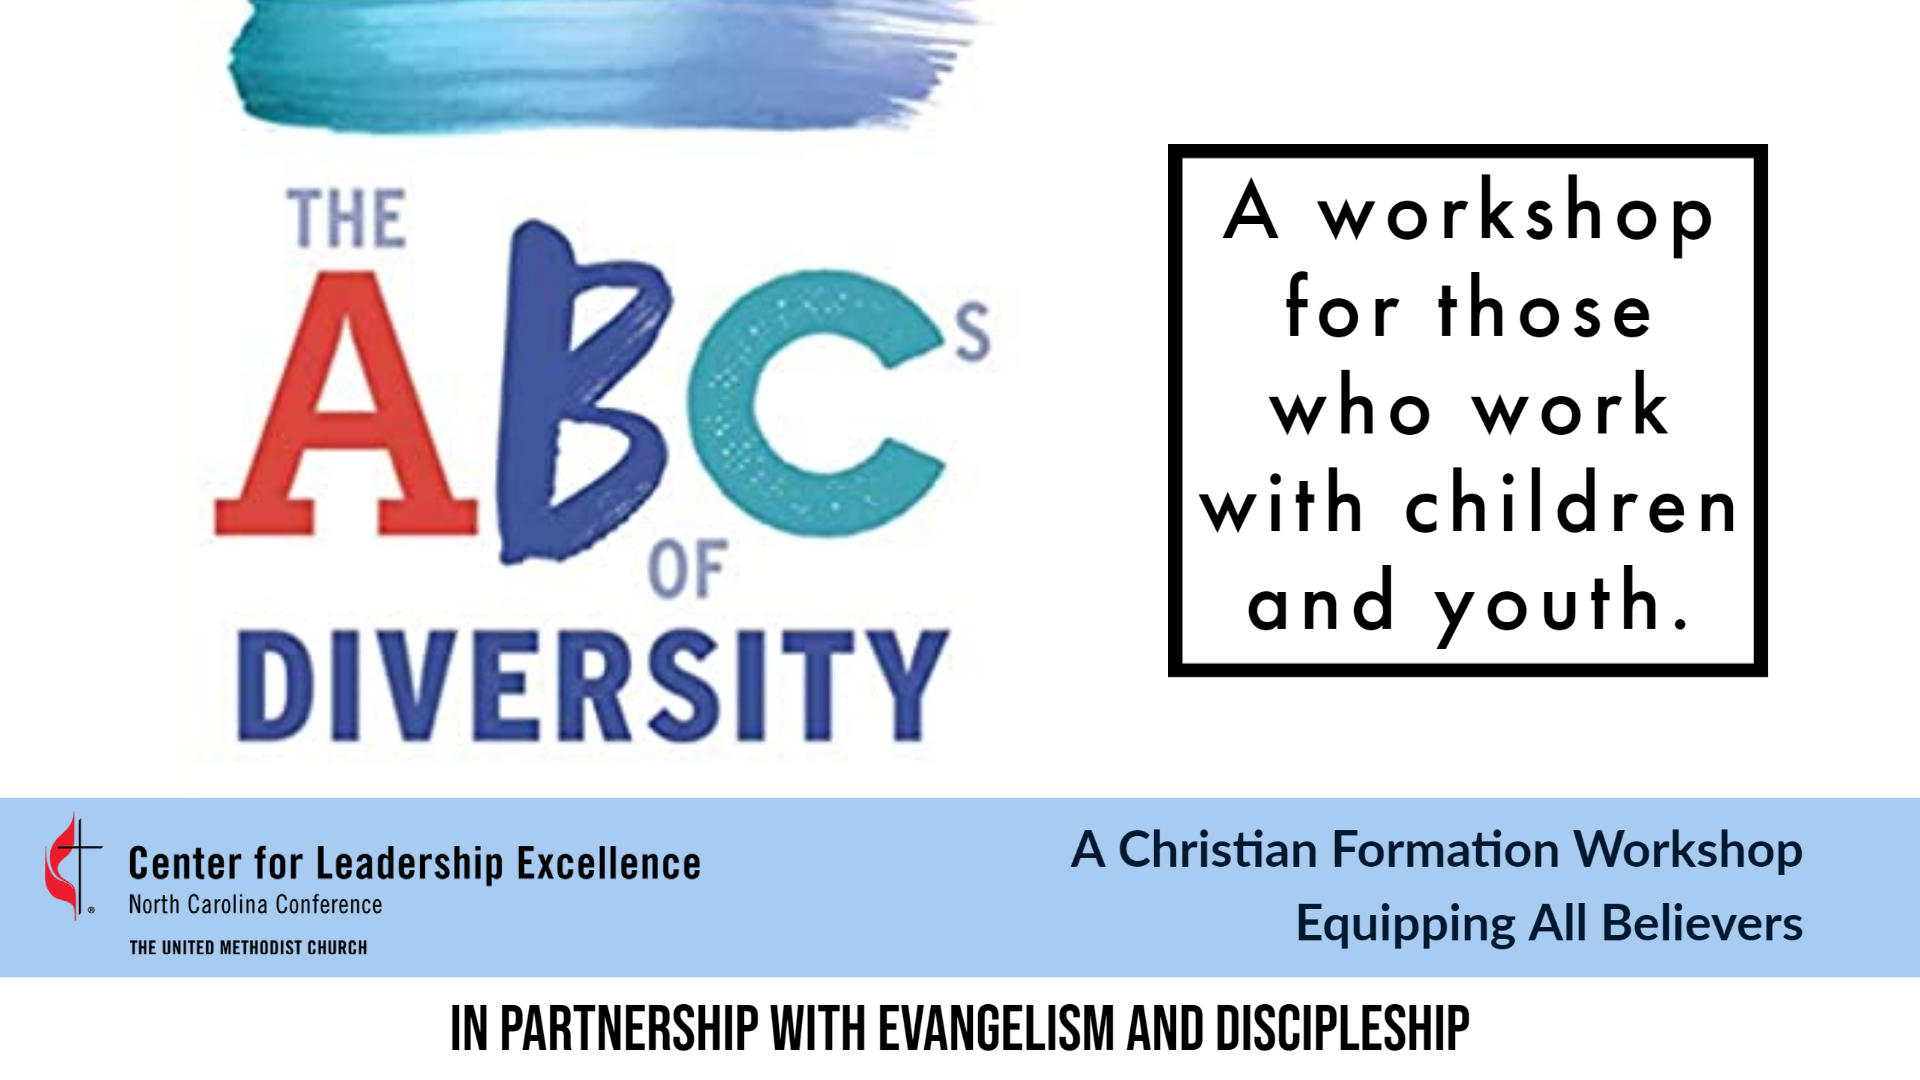 Are you leading youth or children’s ministry?